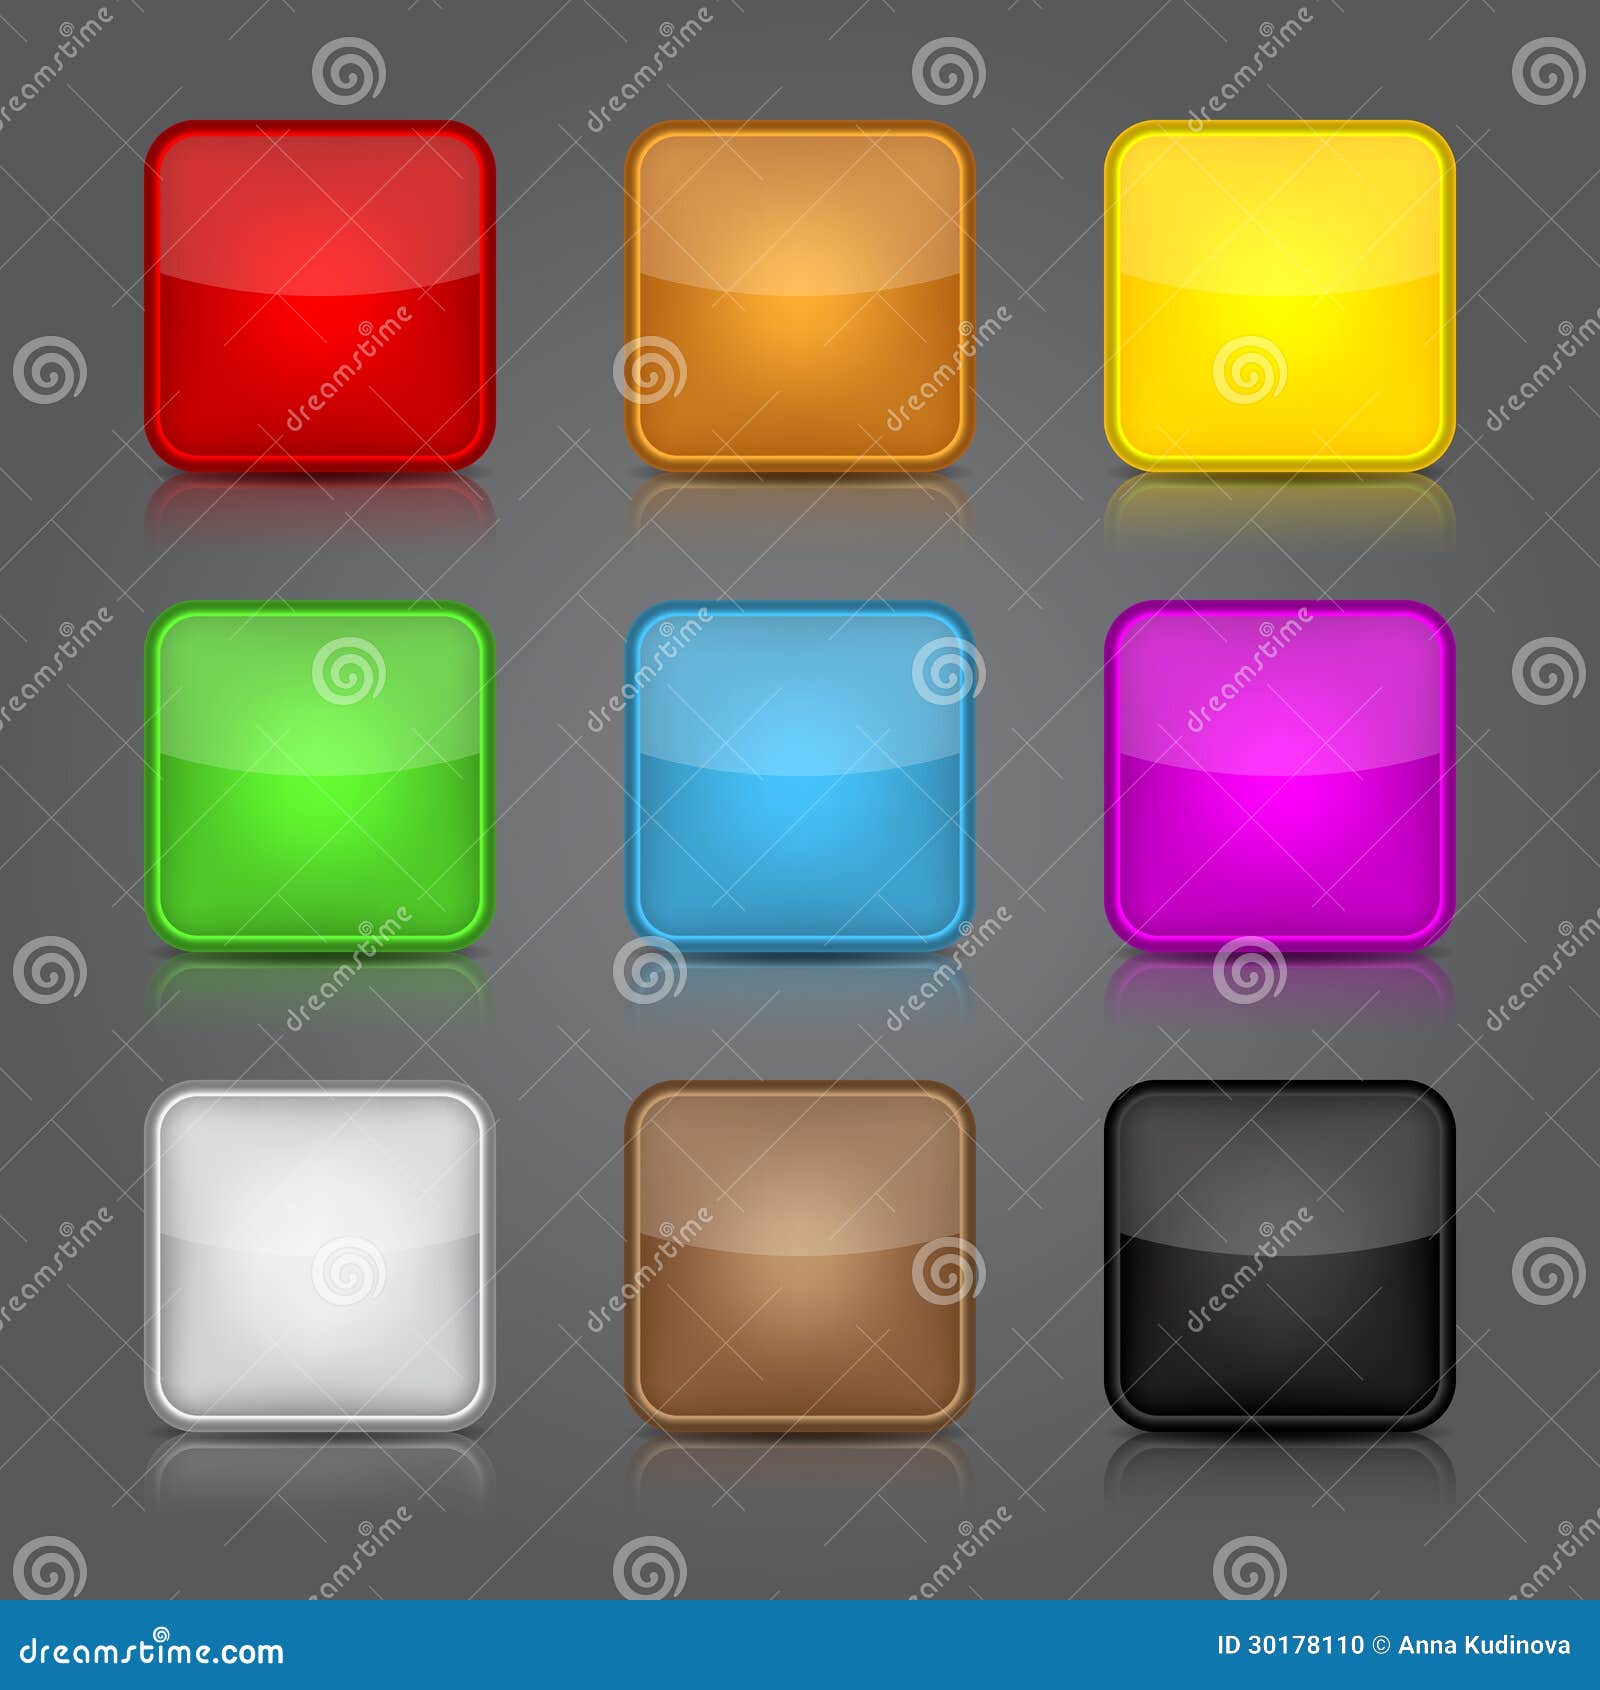 app icons background set. glossy web button icons.